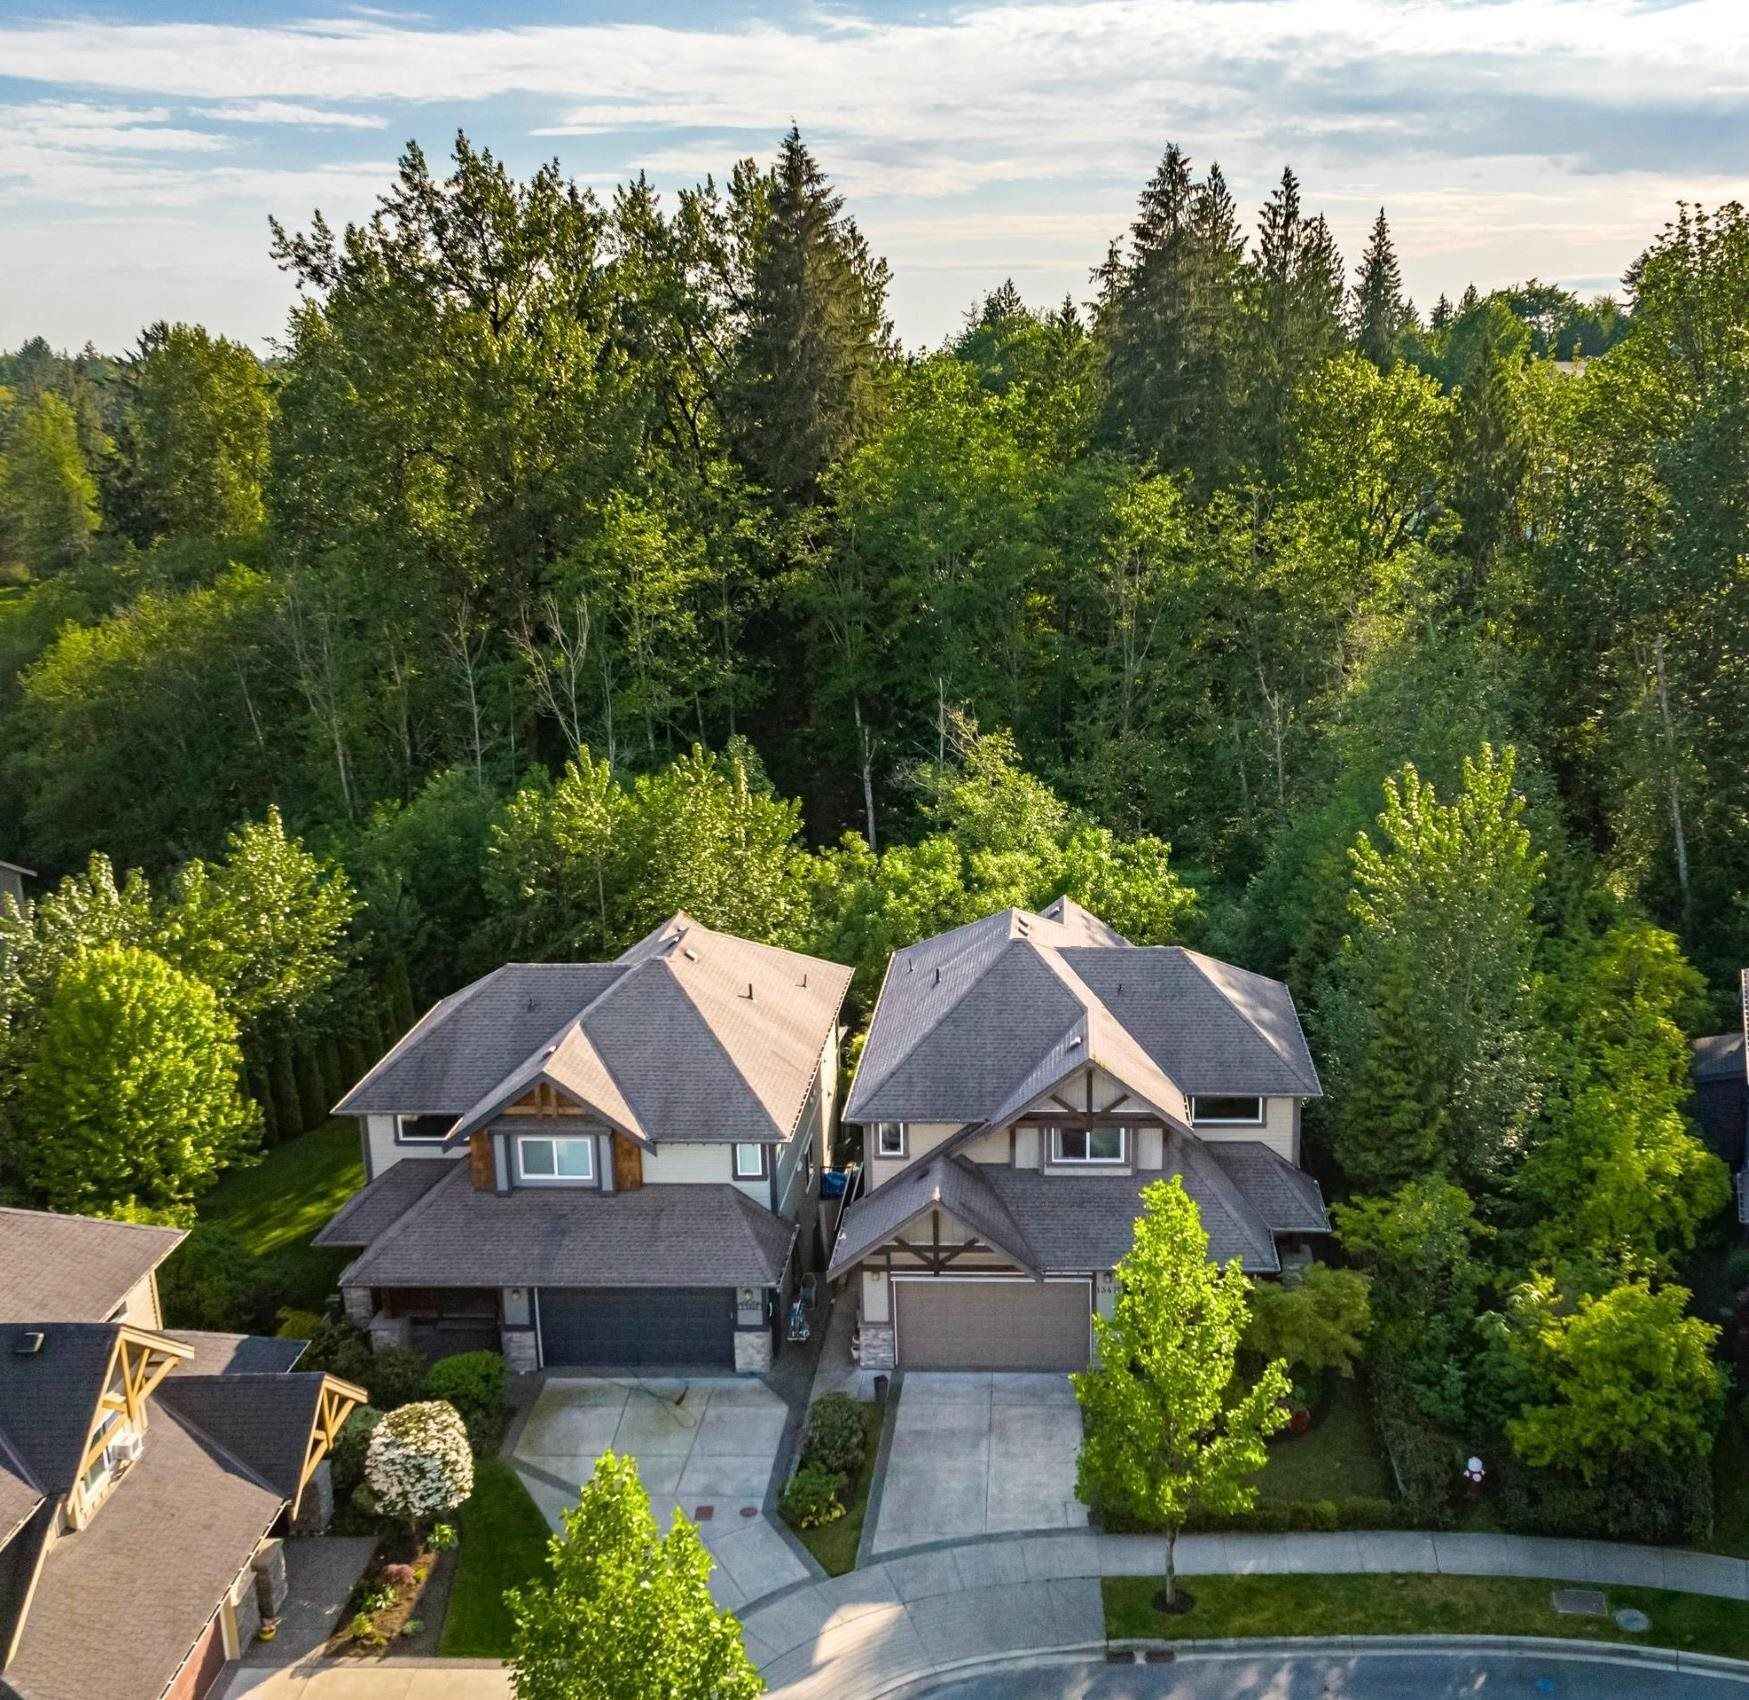 I have sold a property at 13475 229 LOOP in Maple Ridge
